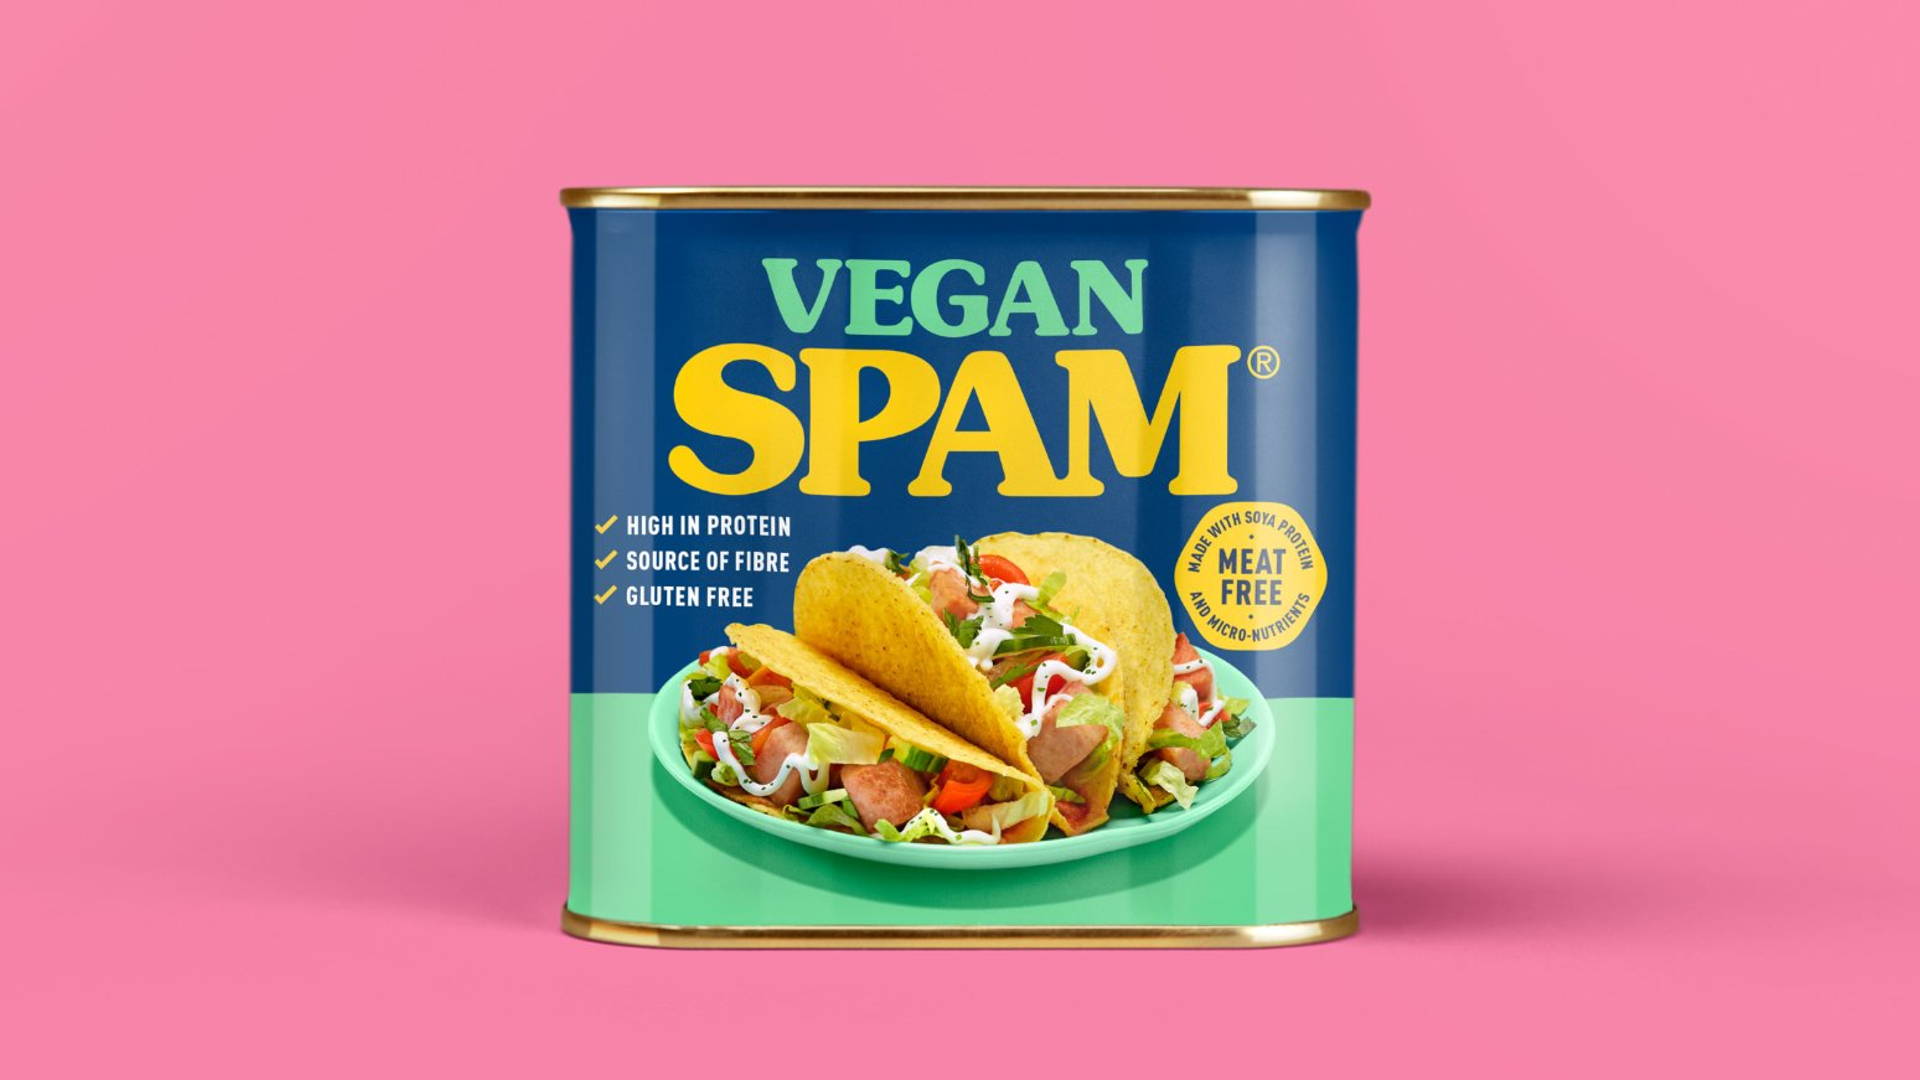 Are You Ready To Go To Flavor Town With Vegan Spam?  Dieline - Design,  Branding & Packaging Inspiration